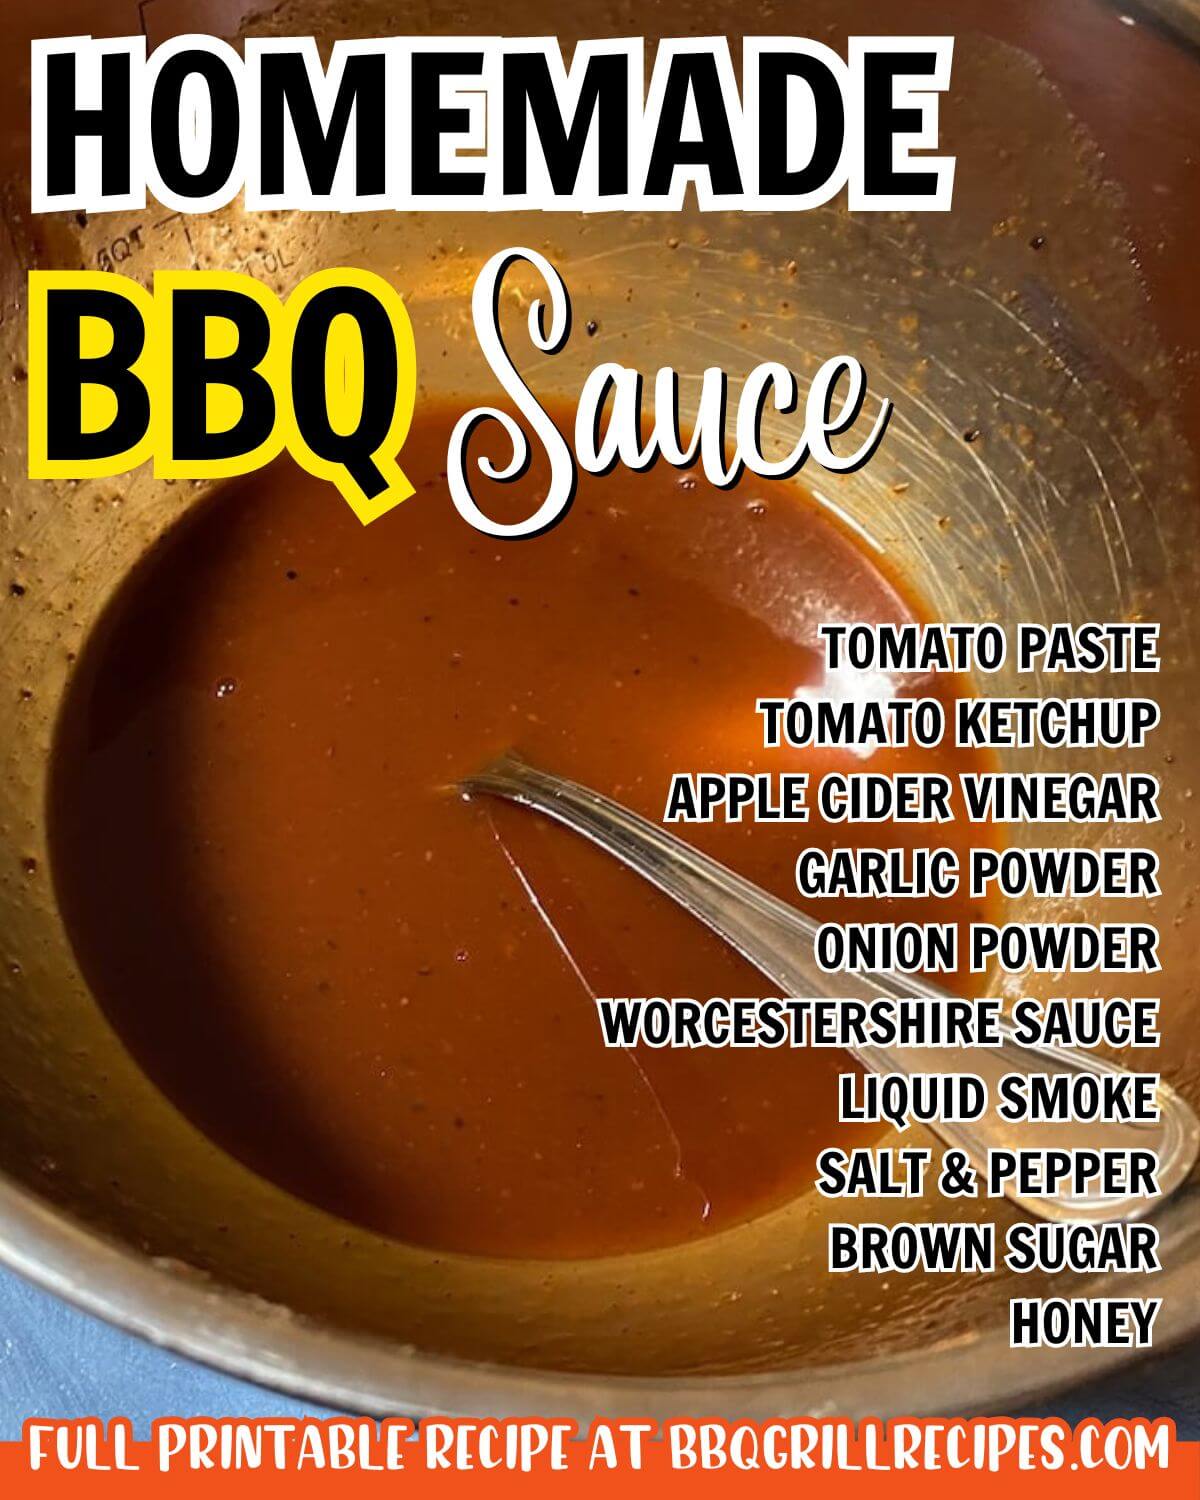 pinterest image - homemade bbq sauce with ingredients list.